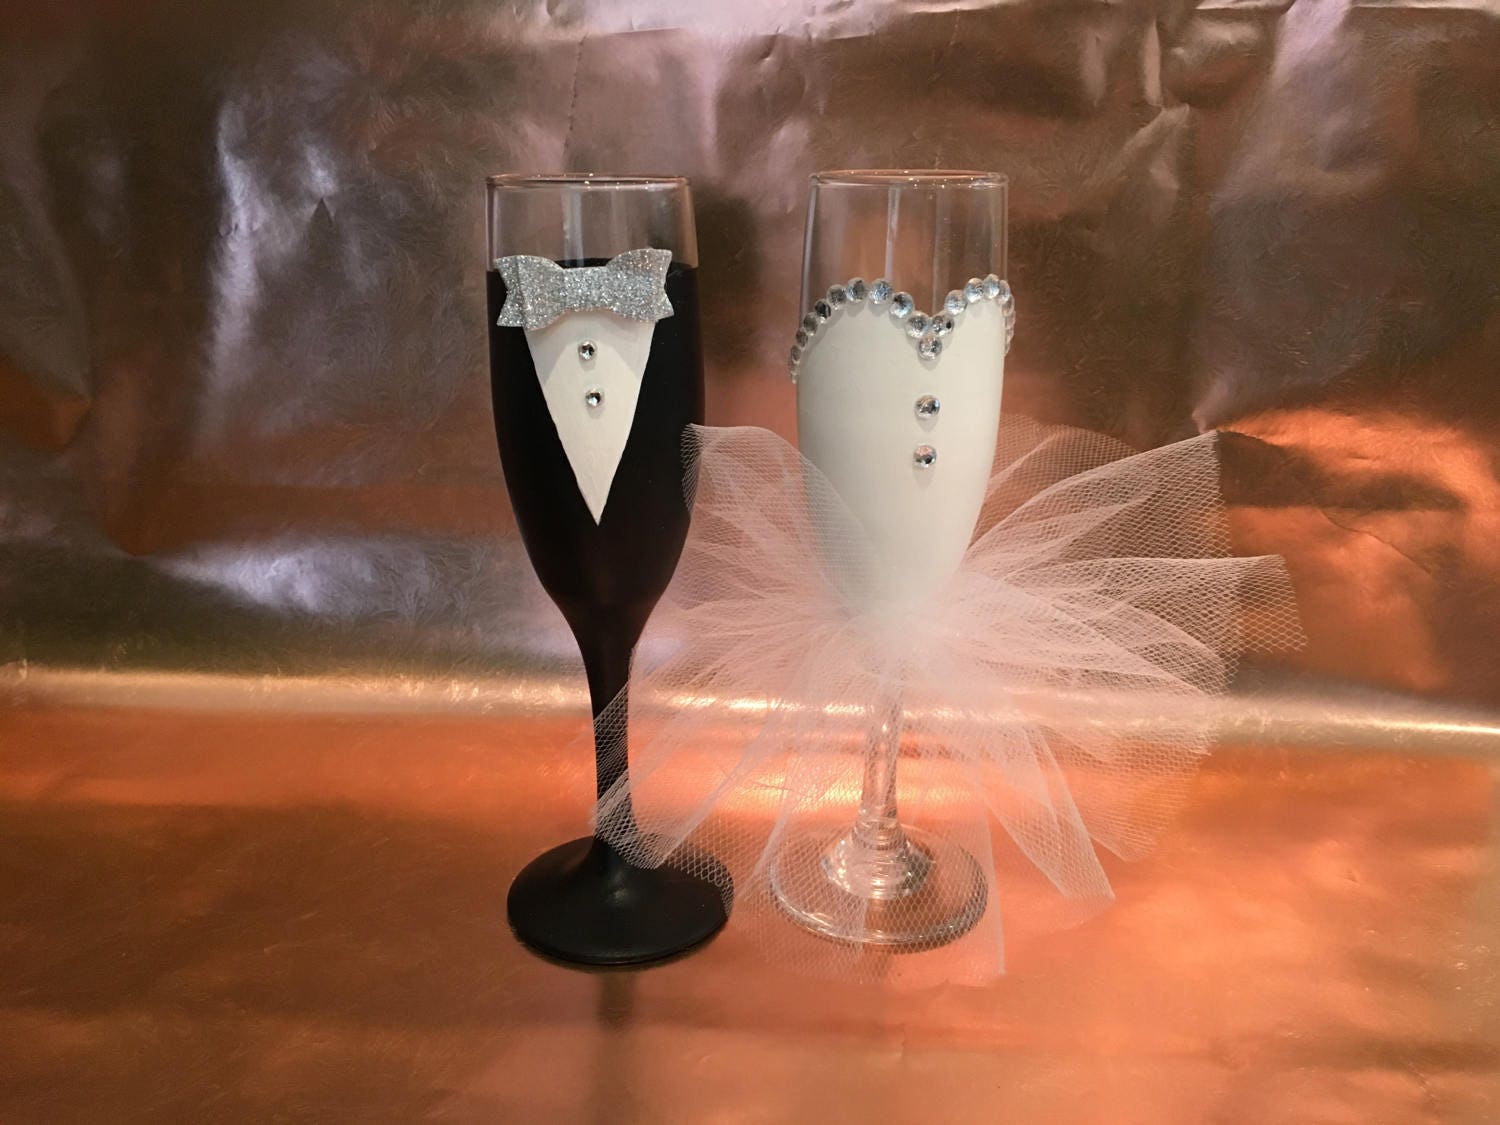 Bride Champagne Flute, 6 Oz Double Insulated Champagne Flute Tumbler,for  Couples Newlyweds Bride Groom Wife His and Hers Anniversary 